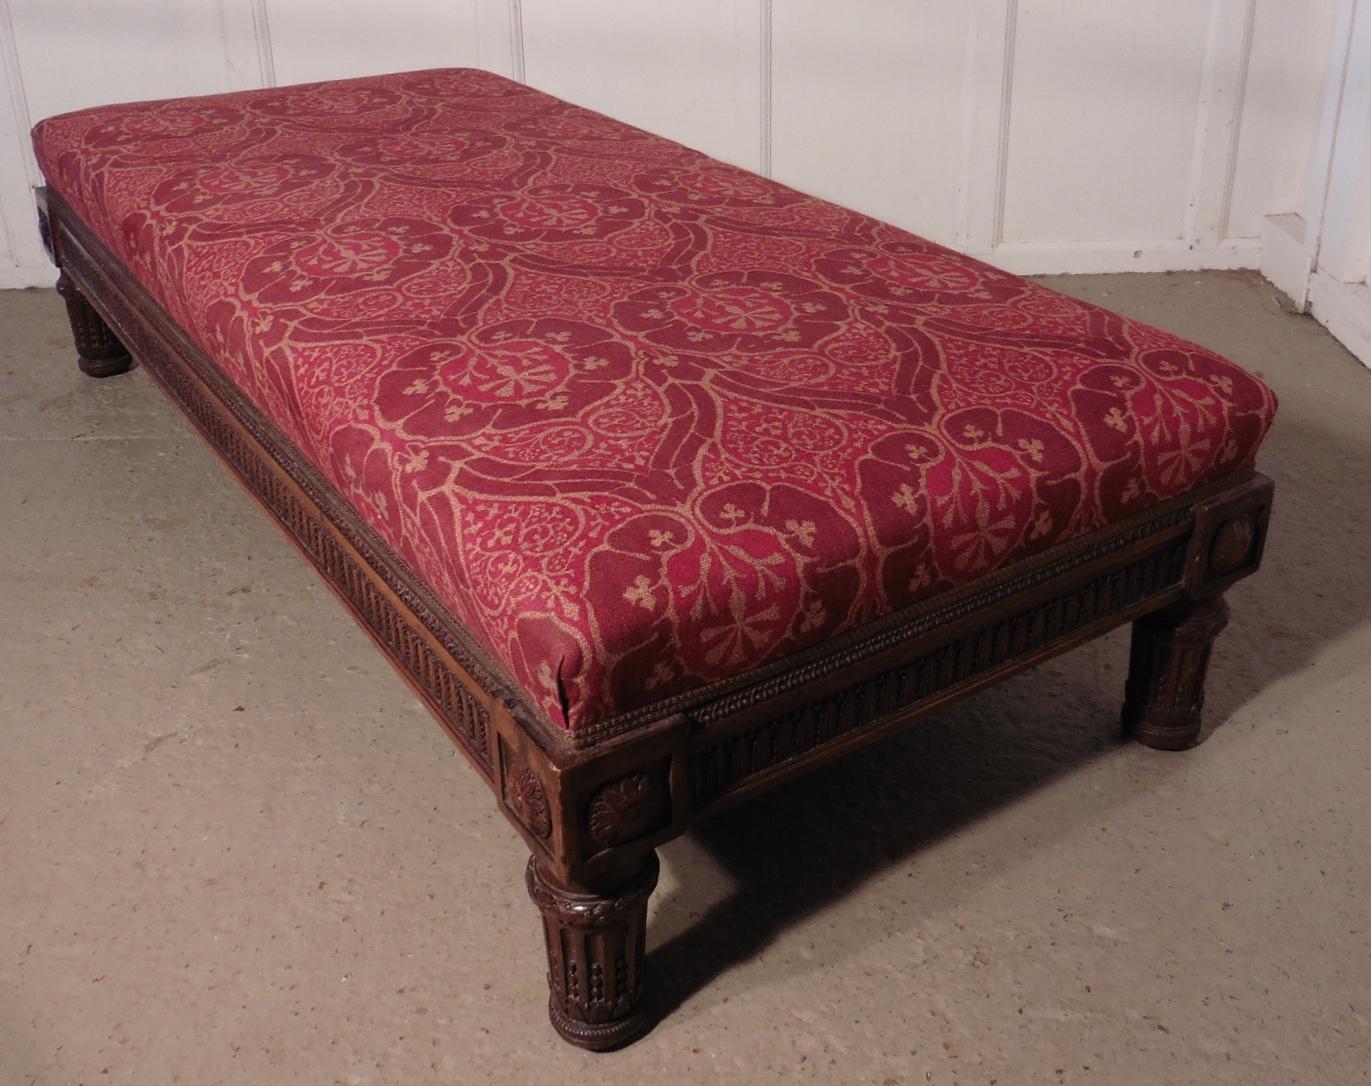 Charming 19th century upholstered window seat or daybed

This delightful window seat dates from the 19th century, it is a substantial piece and would also suitable for use as a daybed
The bed is made in mahogany, it has a carved border and